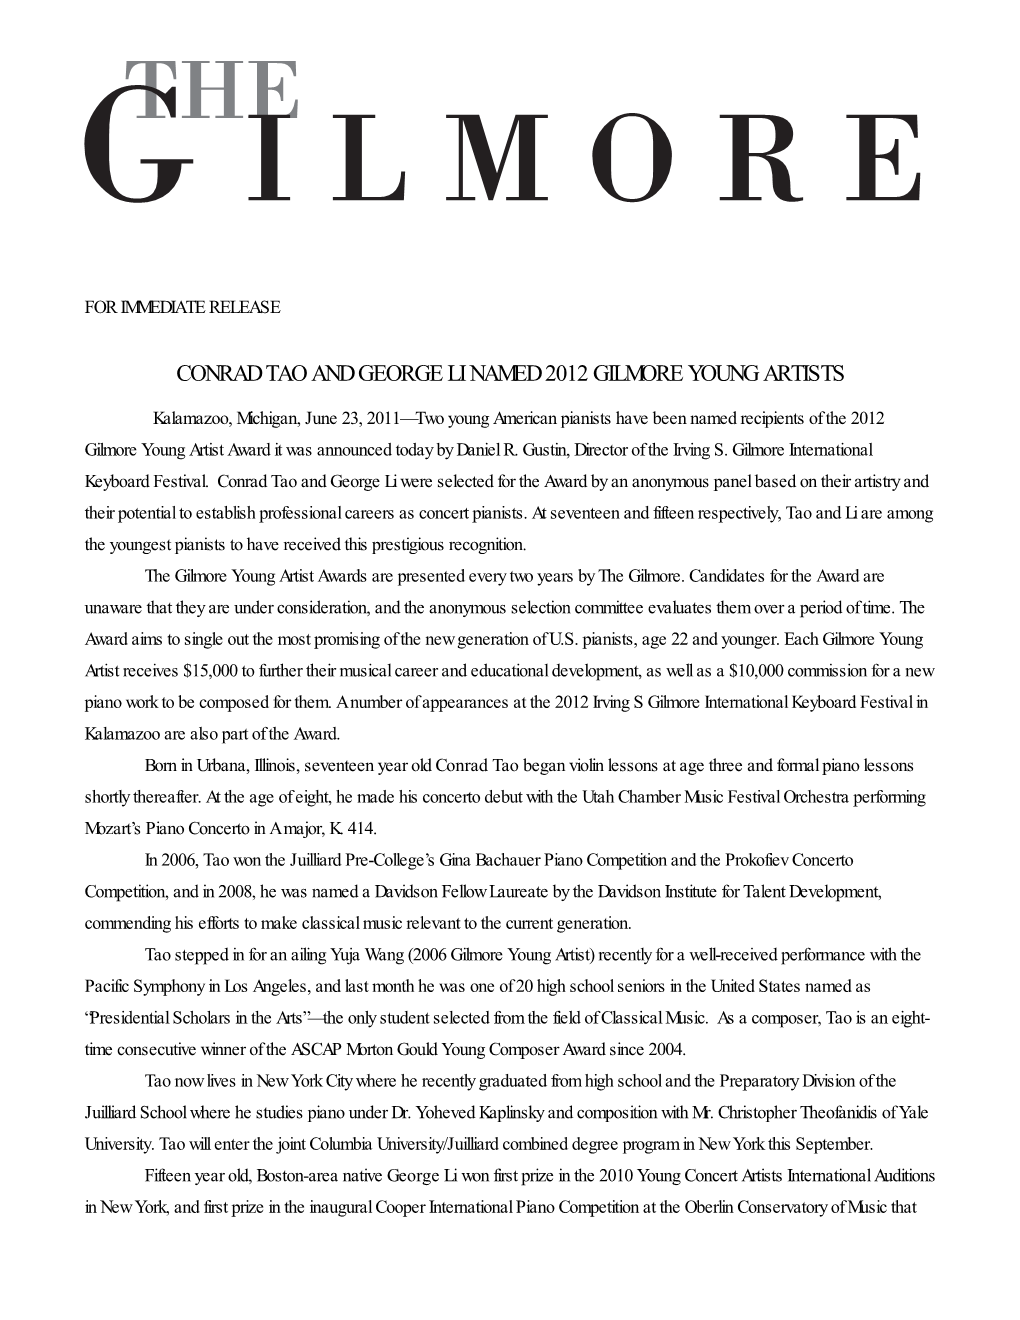 Conrad Tao and George Li Named 2012 Gilmore Young Artists